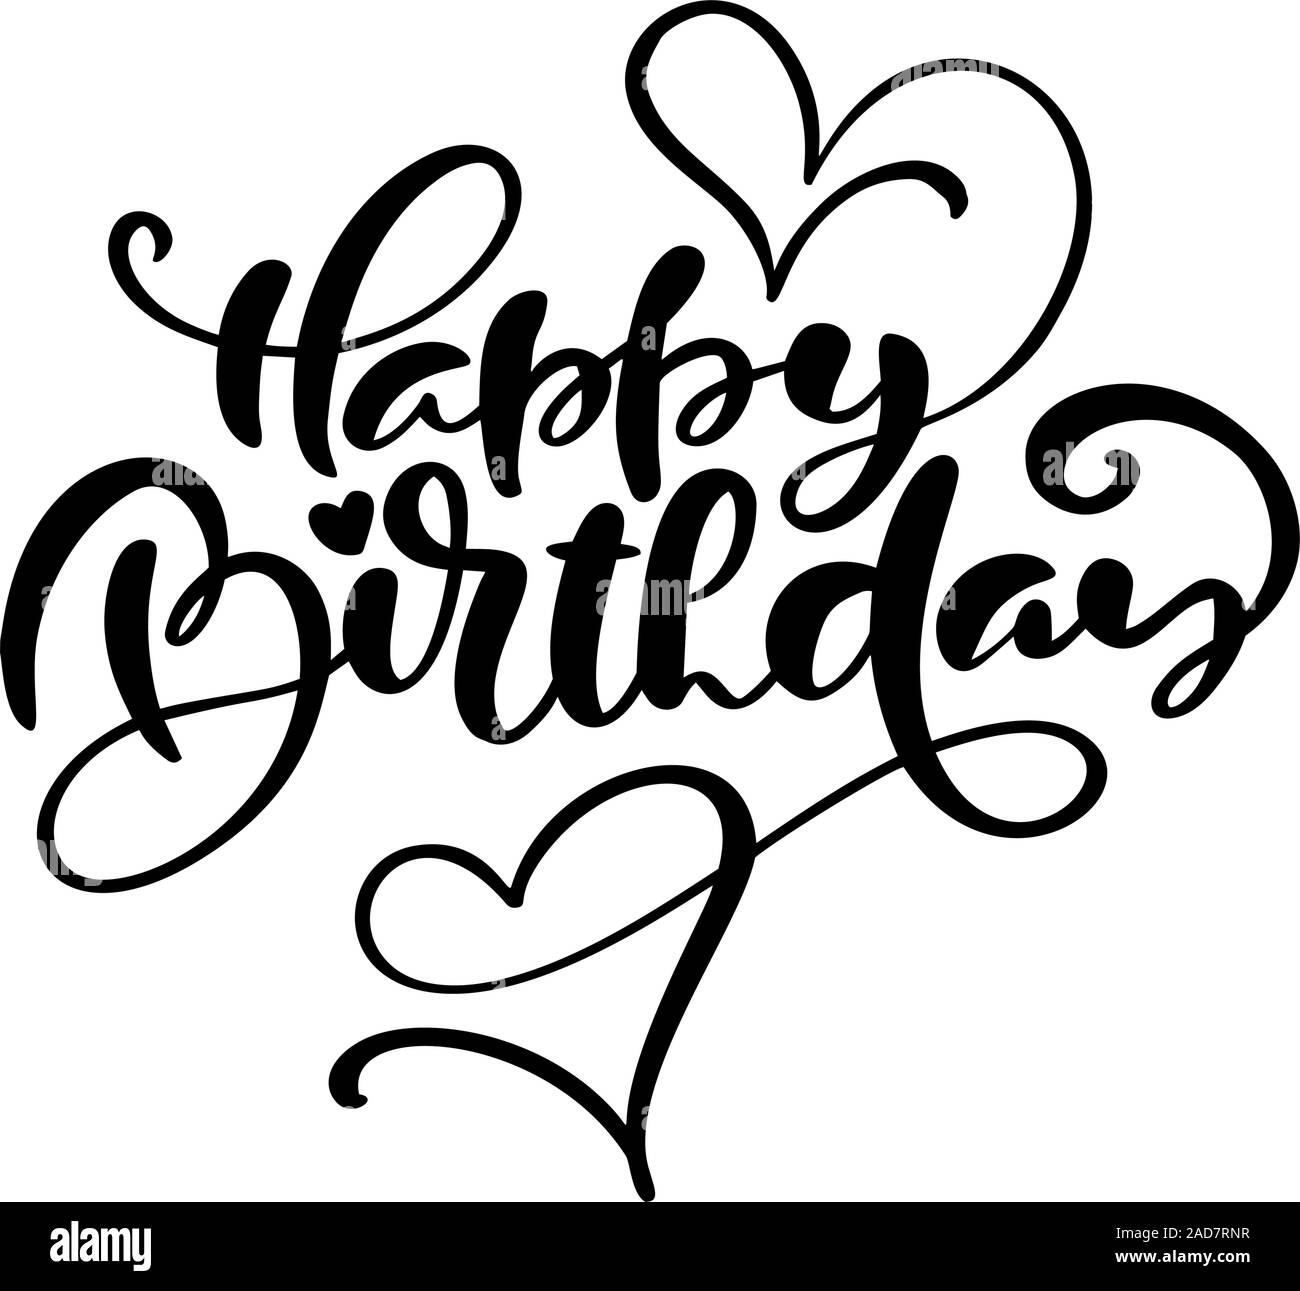 birthday-card-calligraphy-outlet-online-save-46-jlcatj-gob-mx